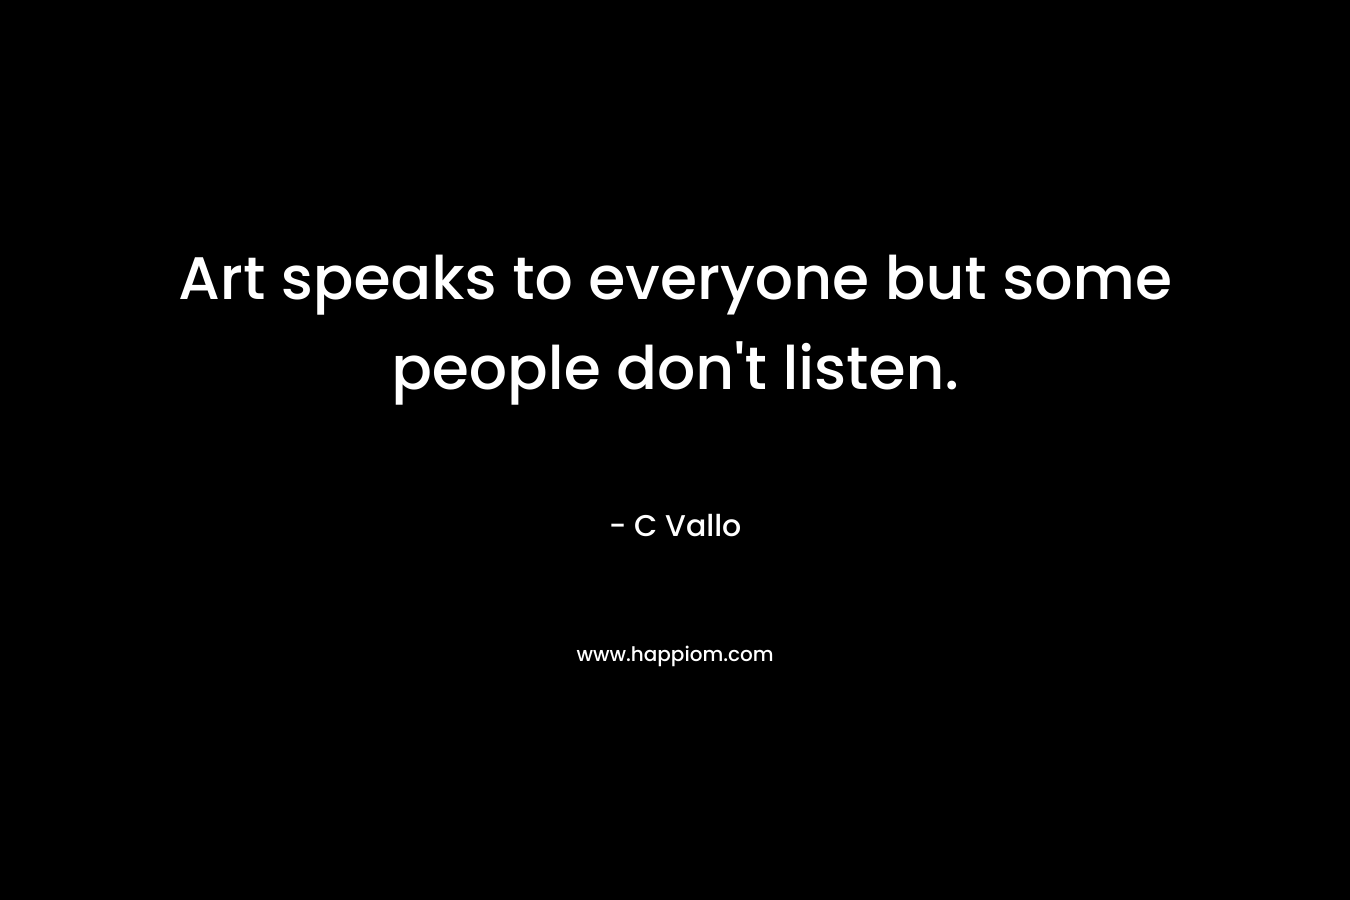 Art speaks to everyone but some people don't listen.